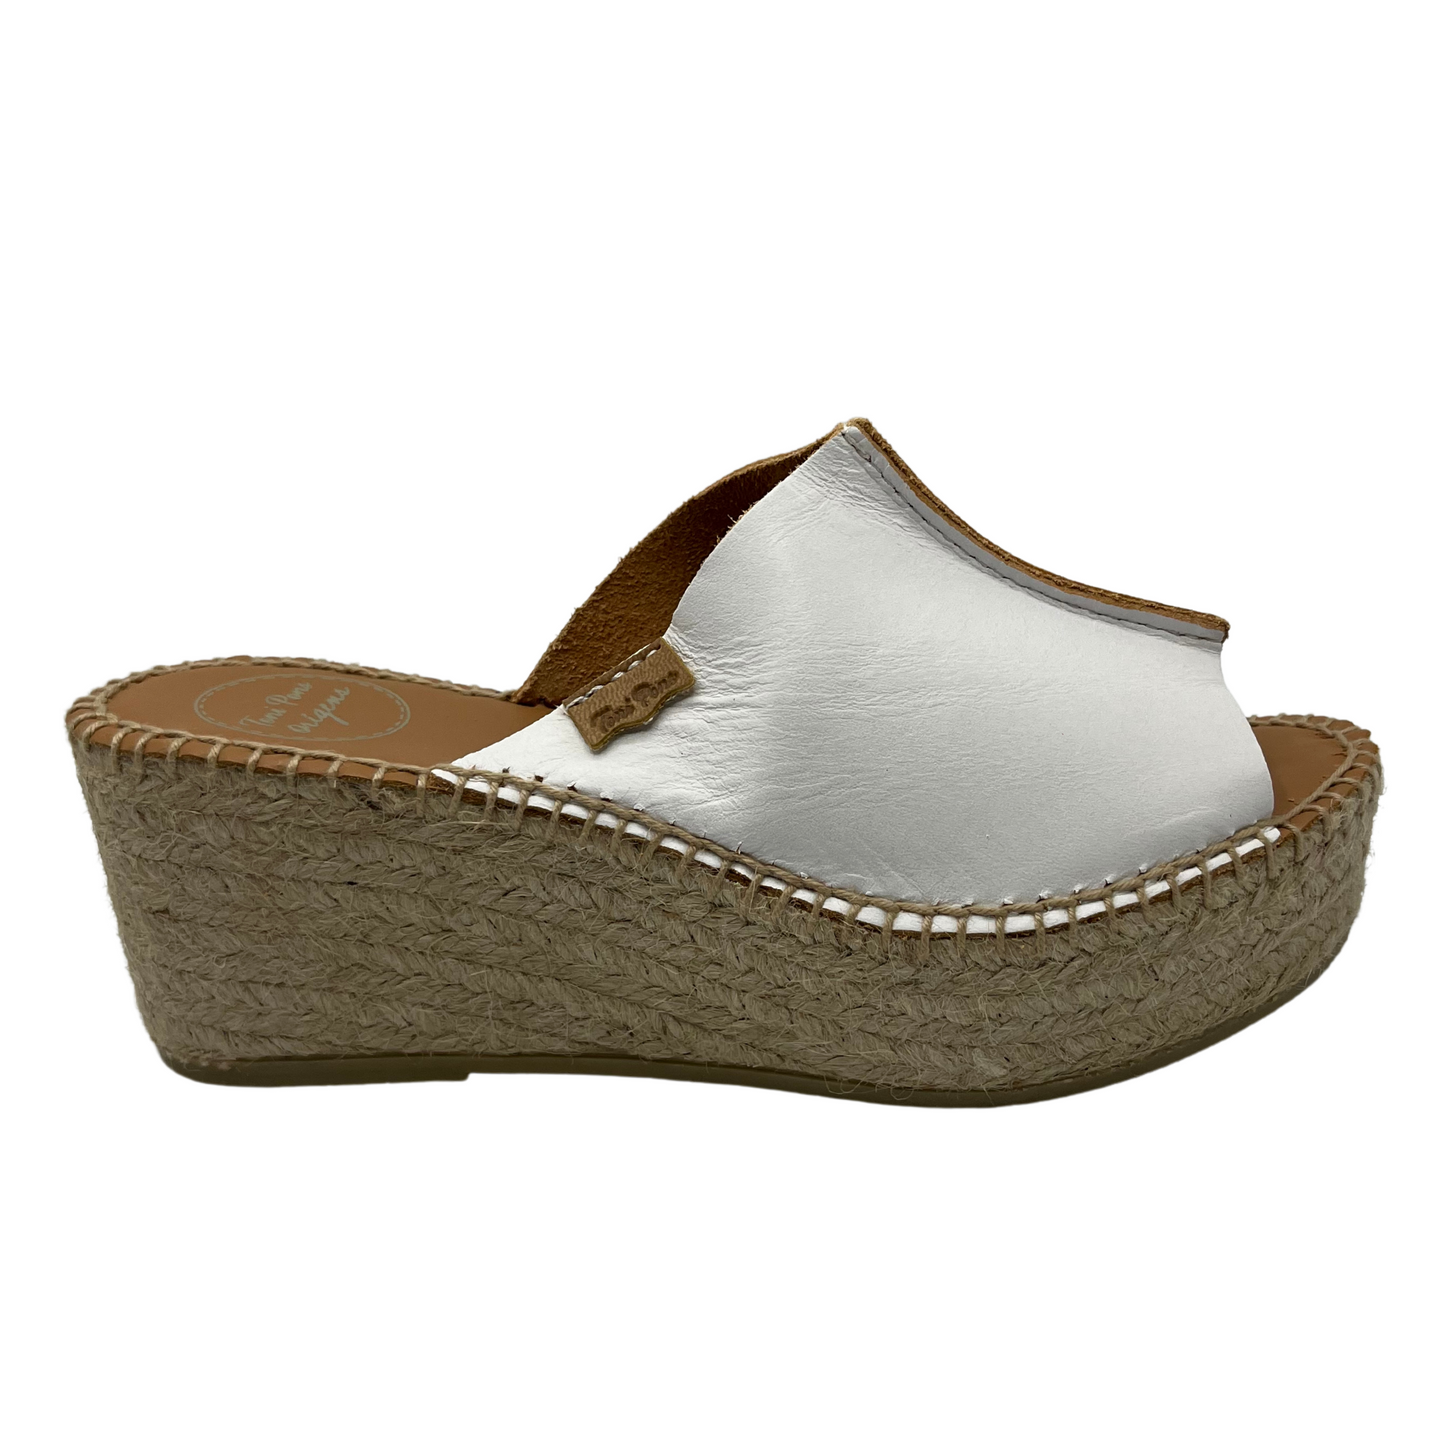 Right facing view of white leather espadrille sandal with wedge heel and stitching round sole